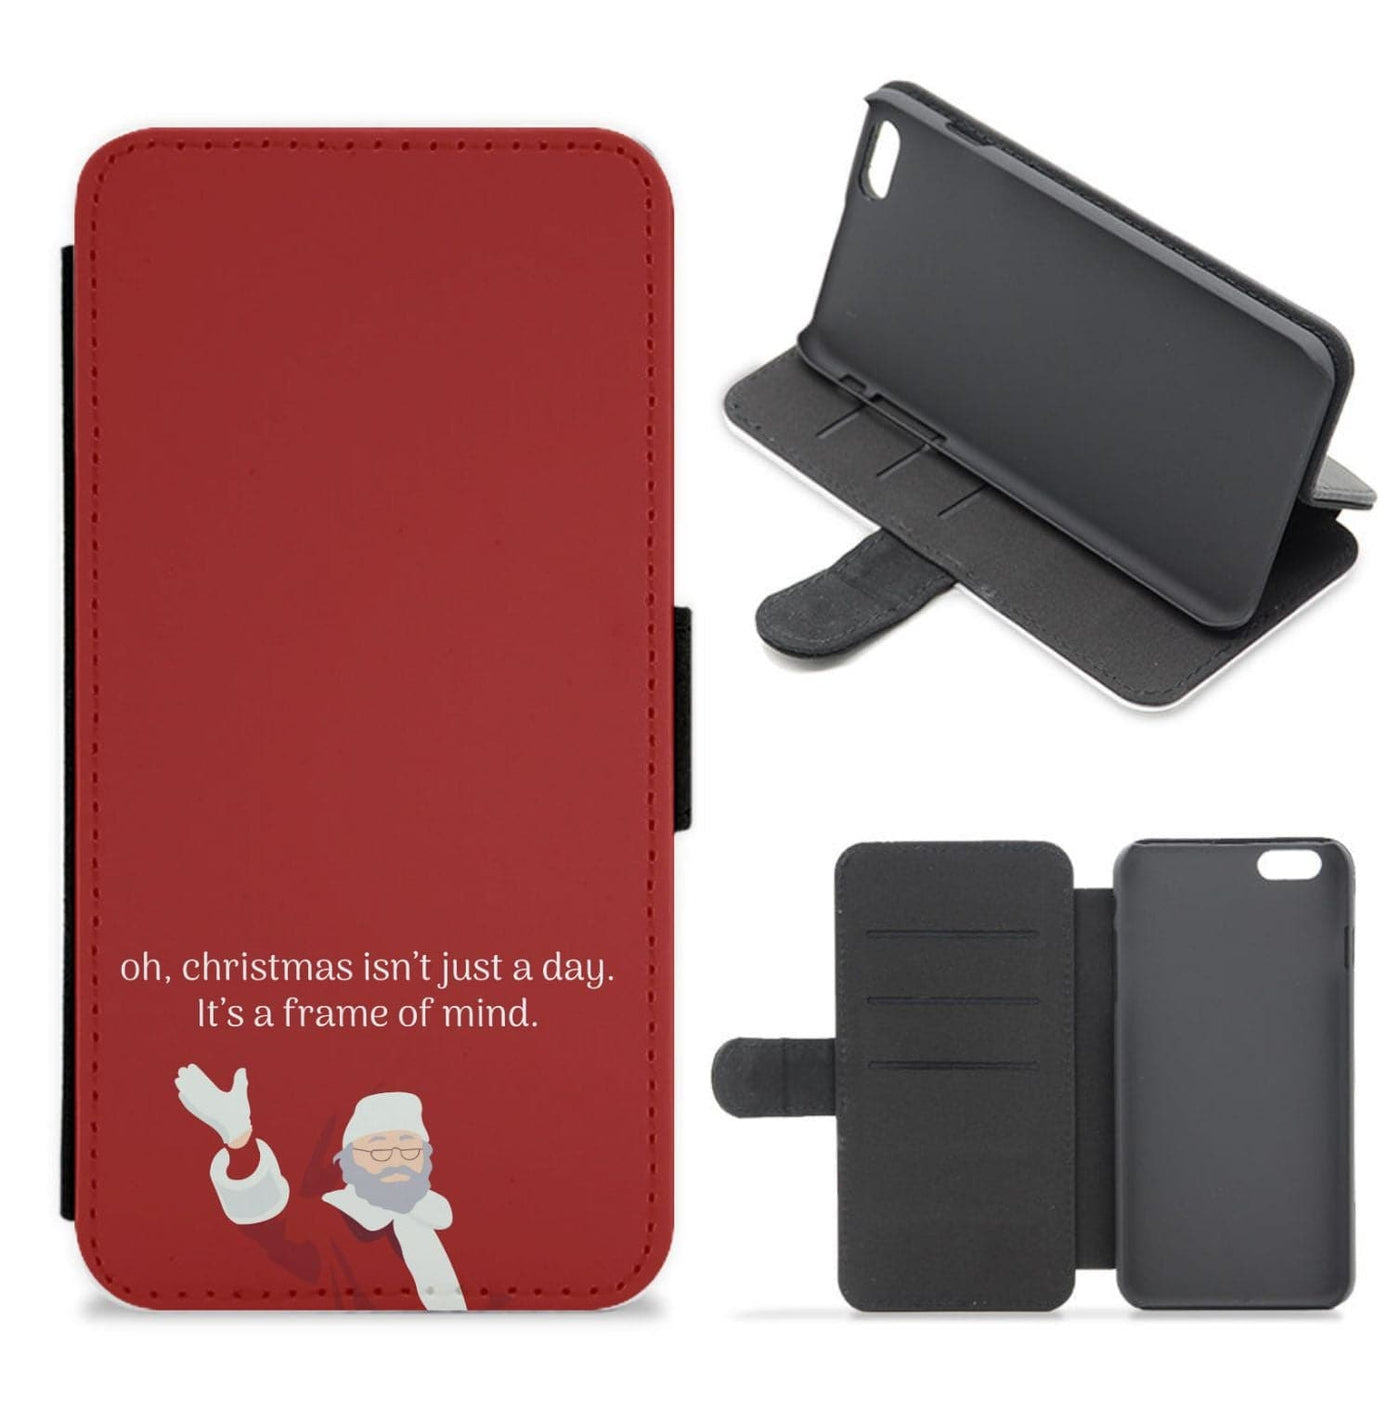 Christmas Isn't Just A Day - Christmas Flip / Wallet Phone Case